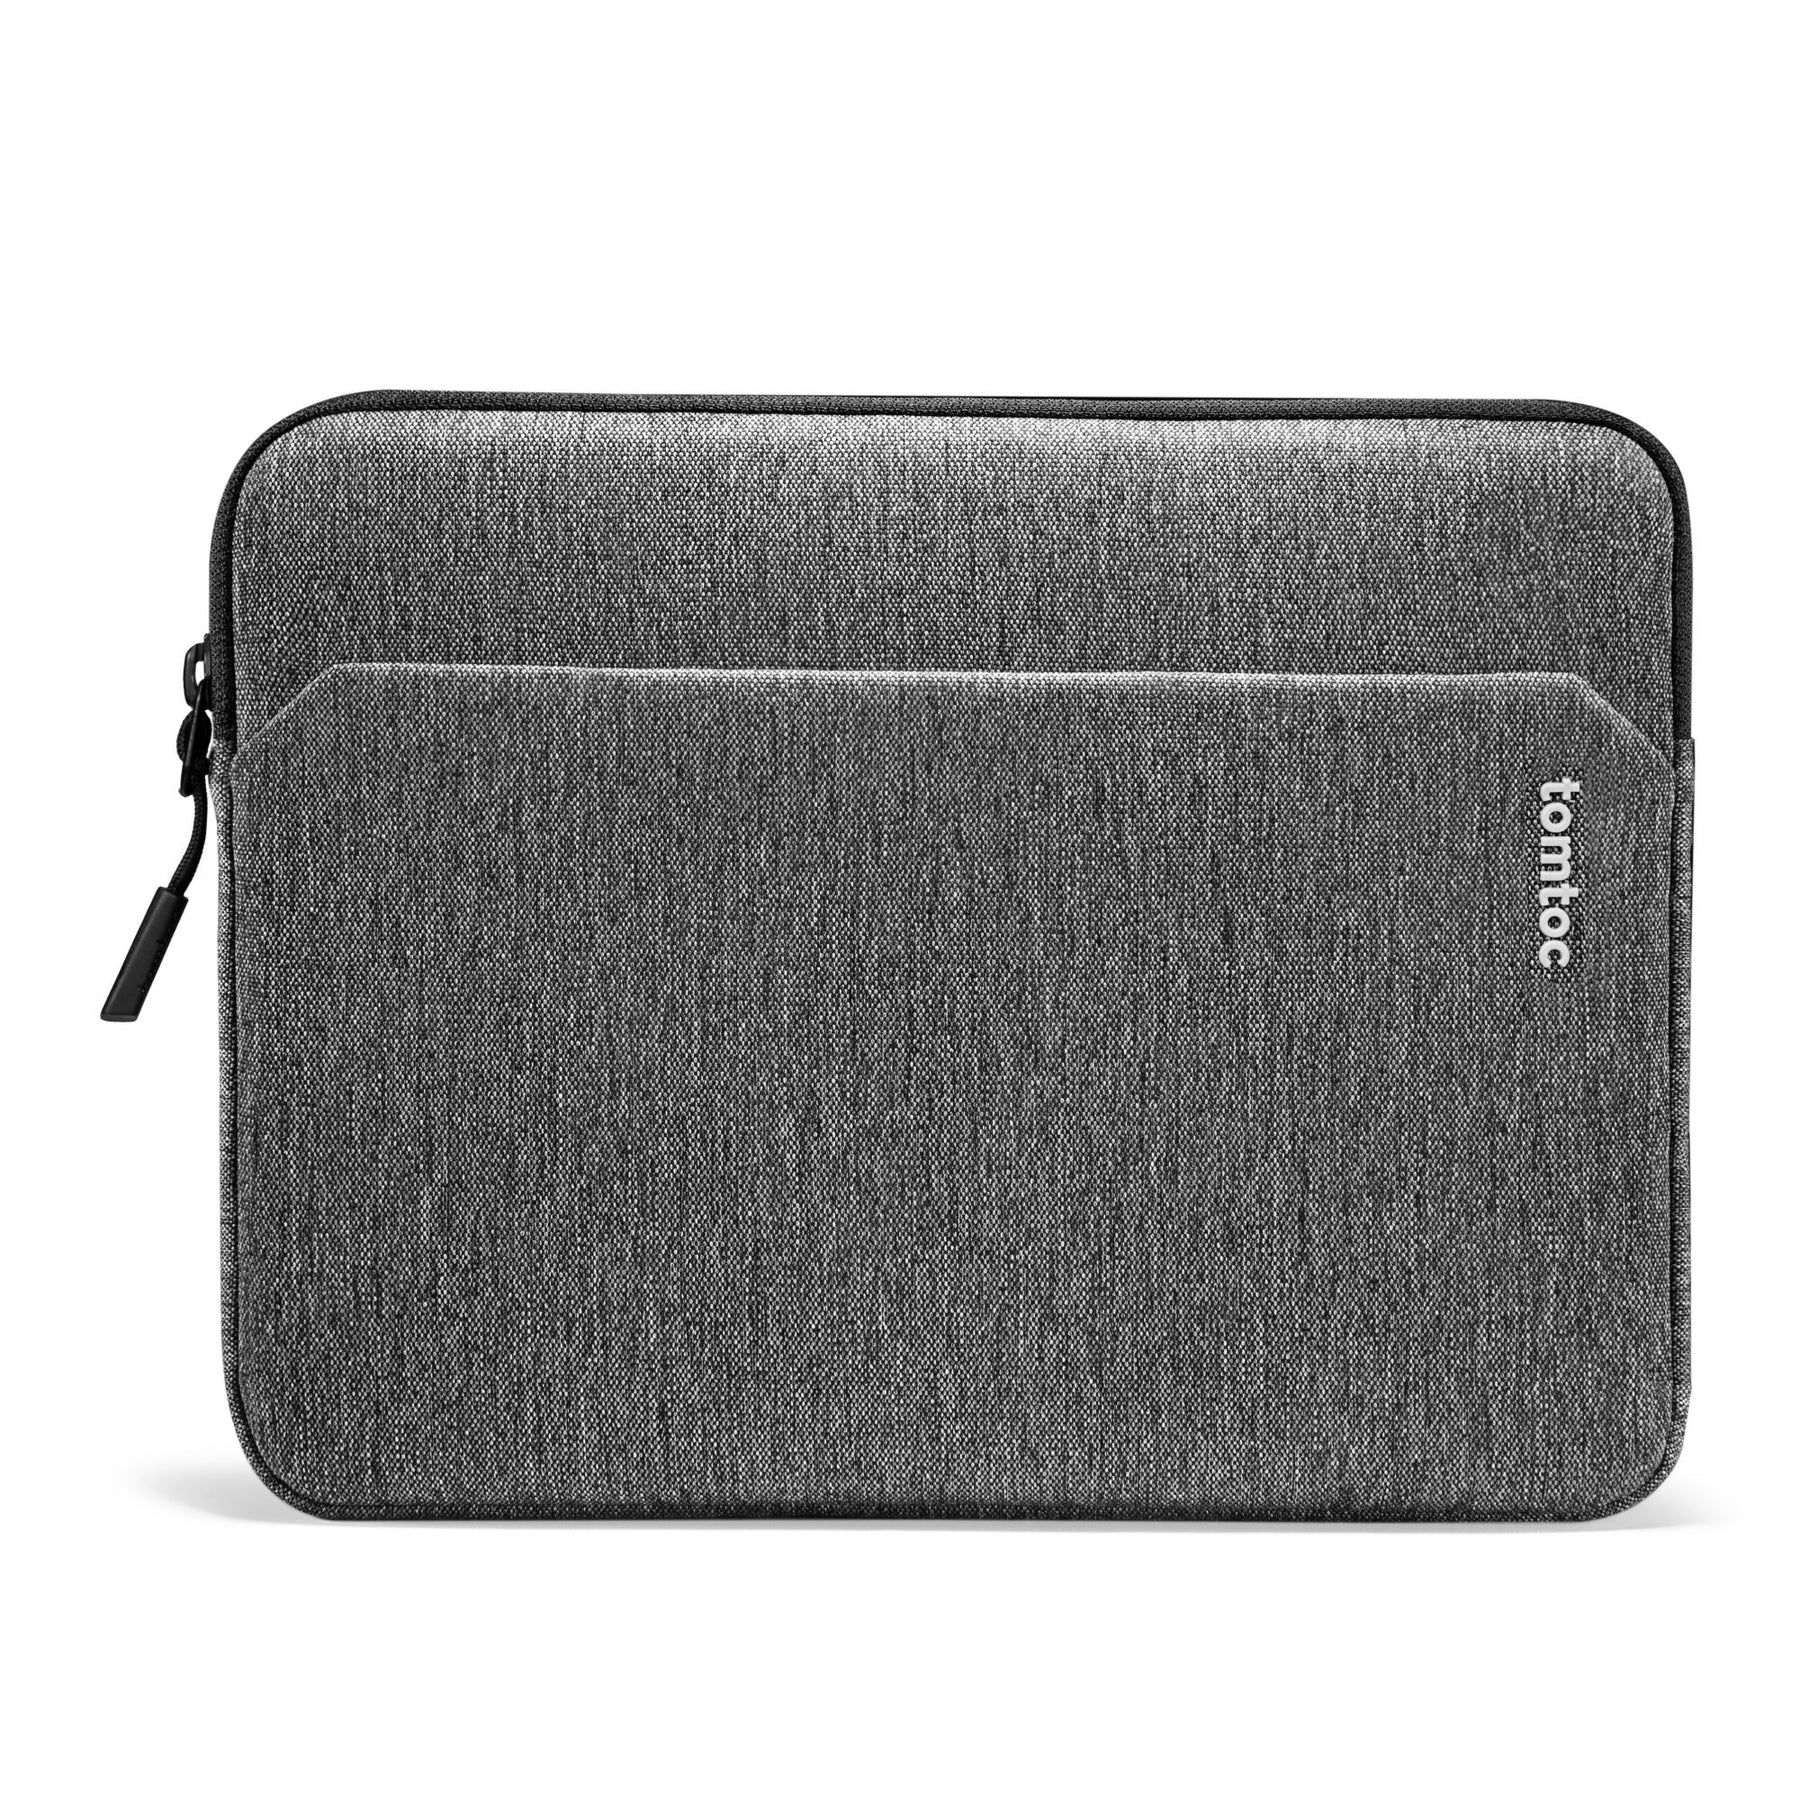 Laptop Bags Kayond Brand Laptop Bag 11 12 13 14 15.6 17 Inch Lady Man Women  Sleeve Case For MacBook Air Pro M1 Computer Notebook PC Dropship 230831  From 13,04 € | DHgate